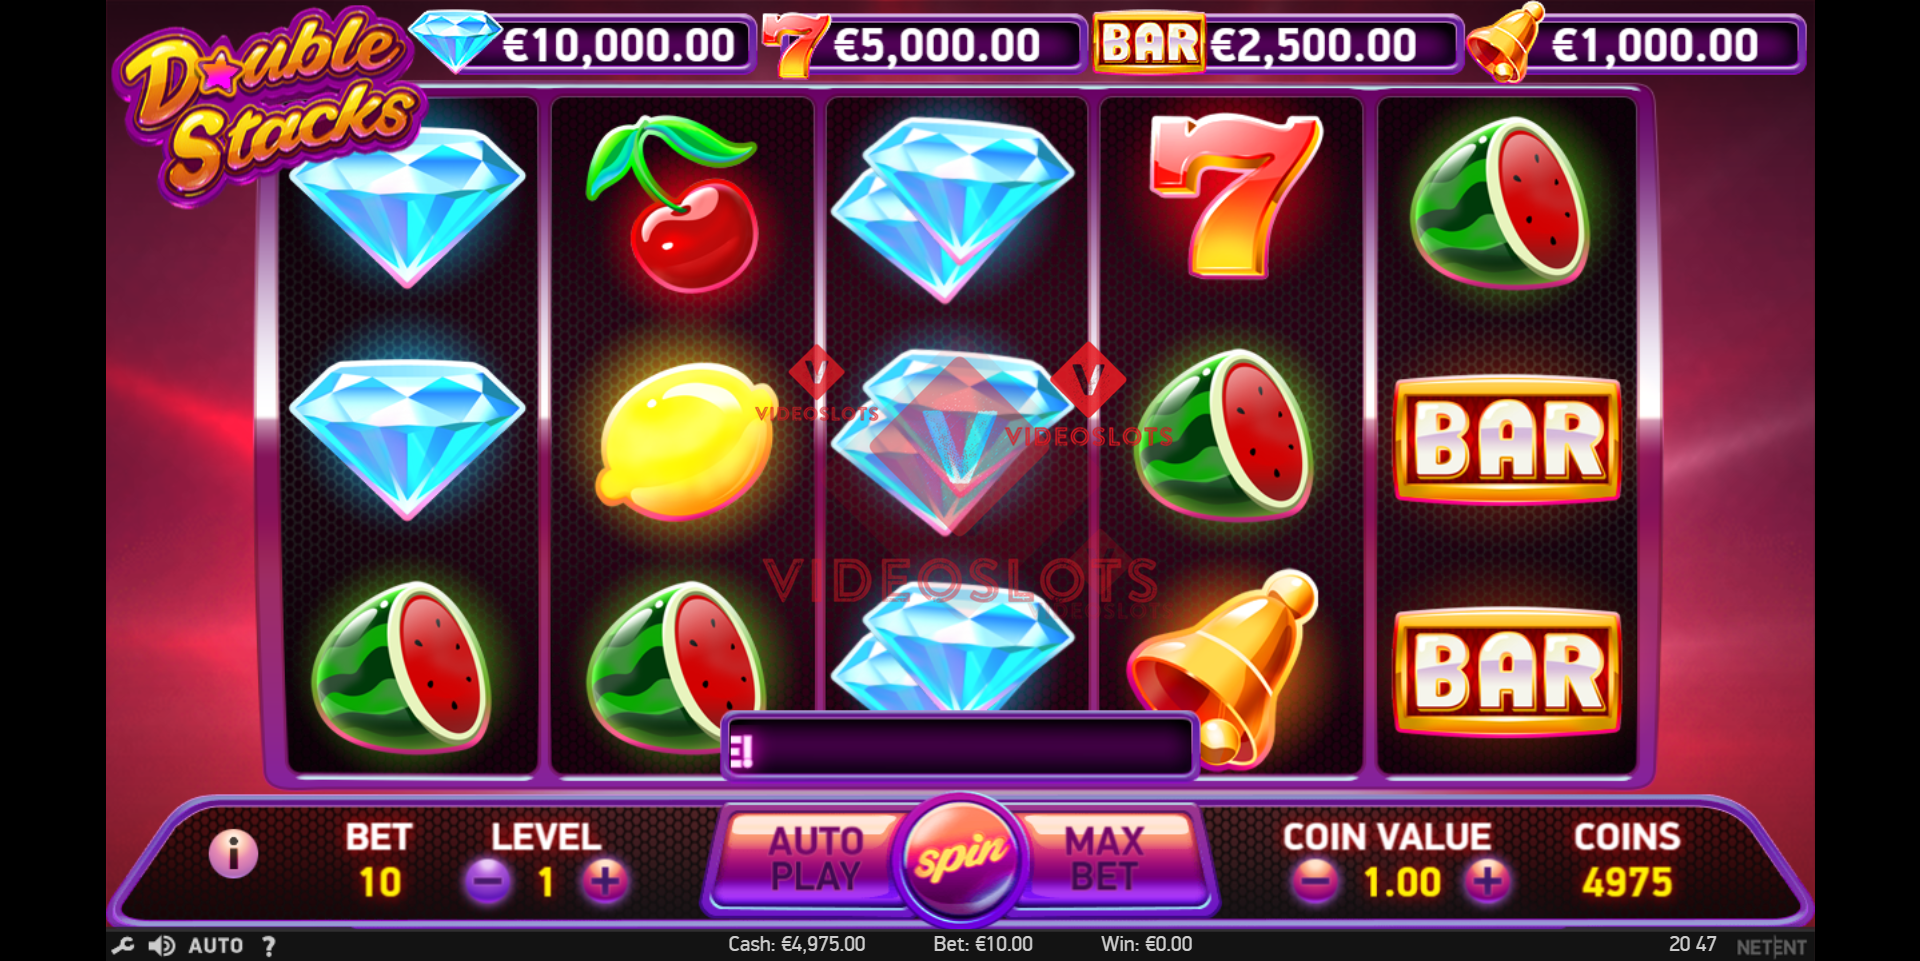 Base Game for Double Stacks slot from NetEnt